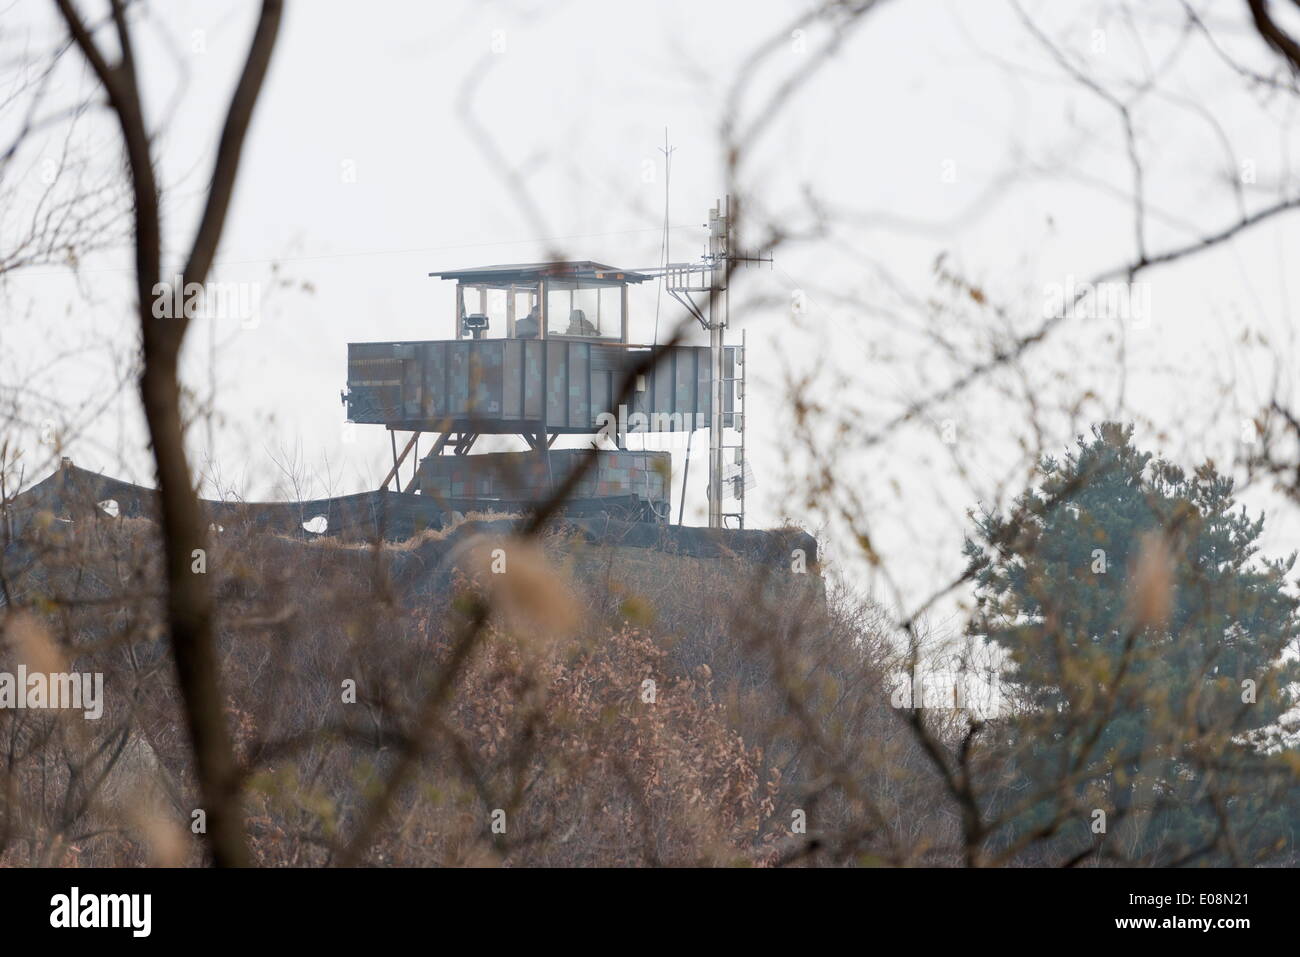 Border watch tower, DMZ (Demilitarized Zone) on the border of North and South Korea, South Korea, Asia Stock Photo